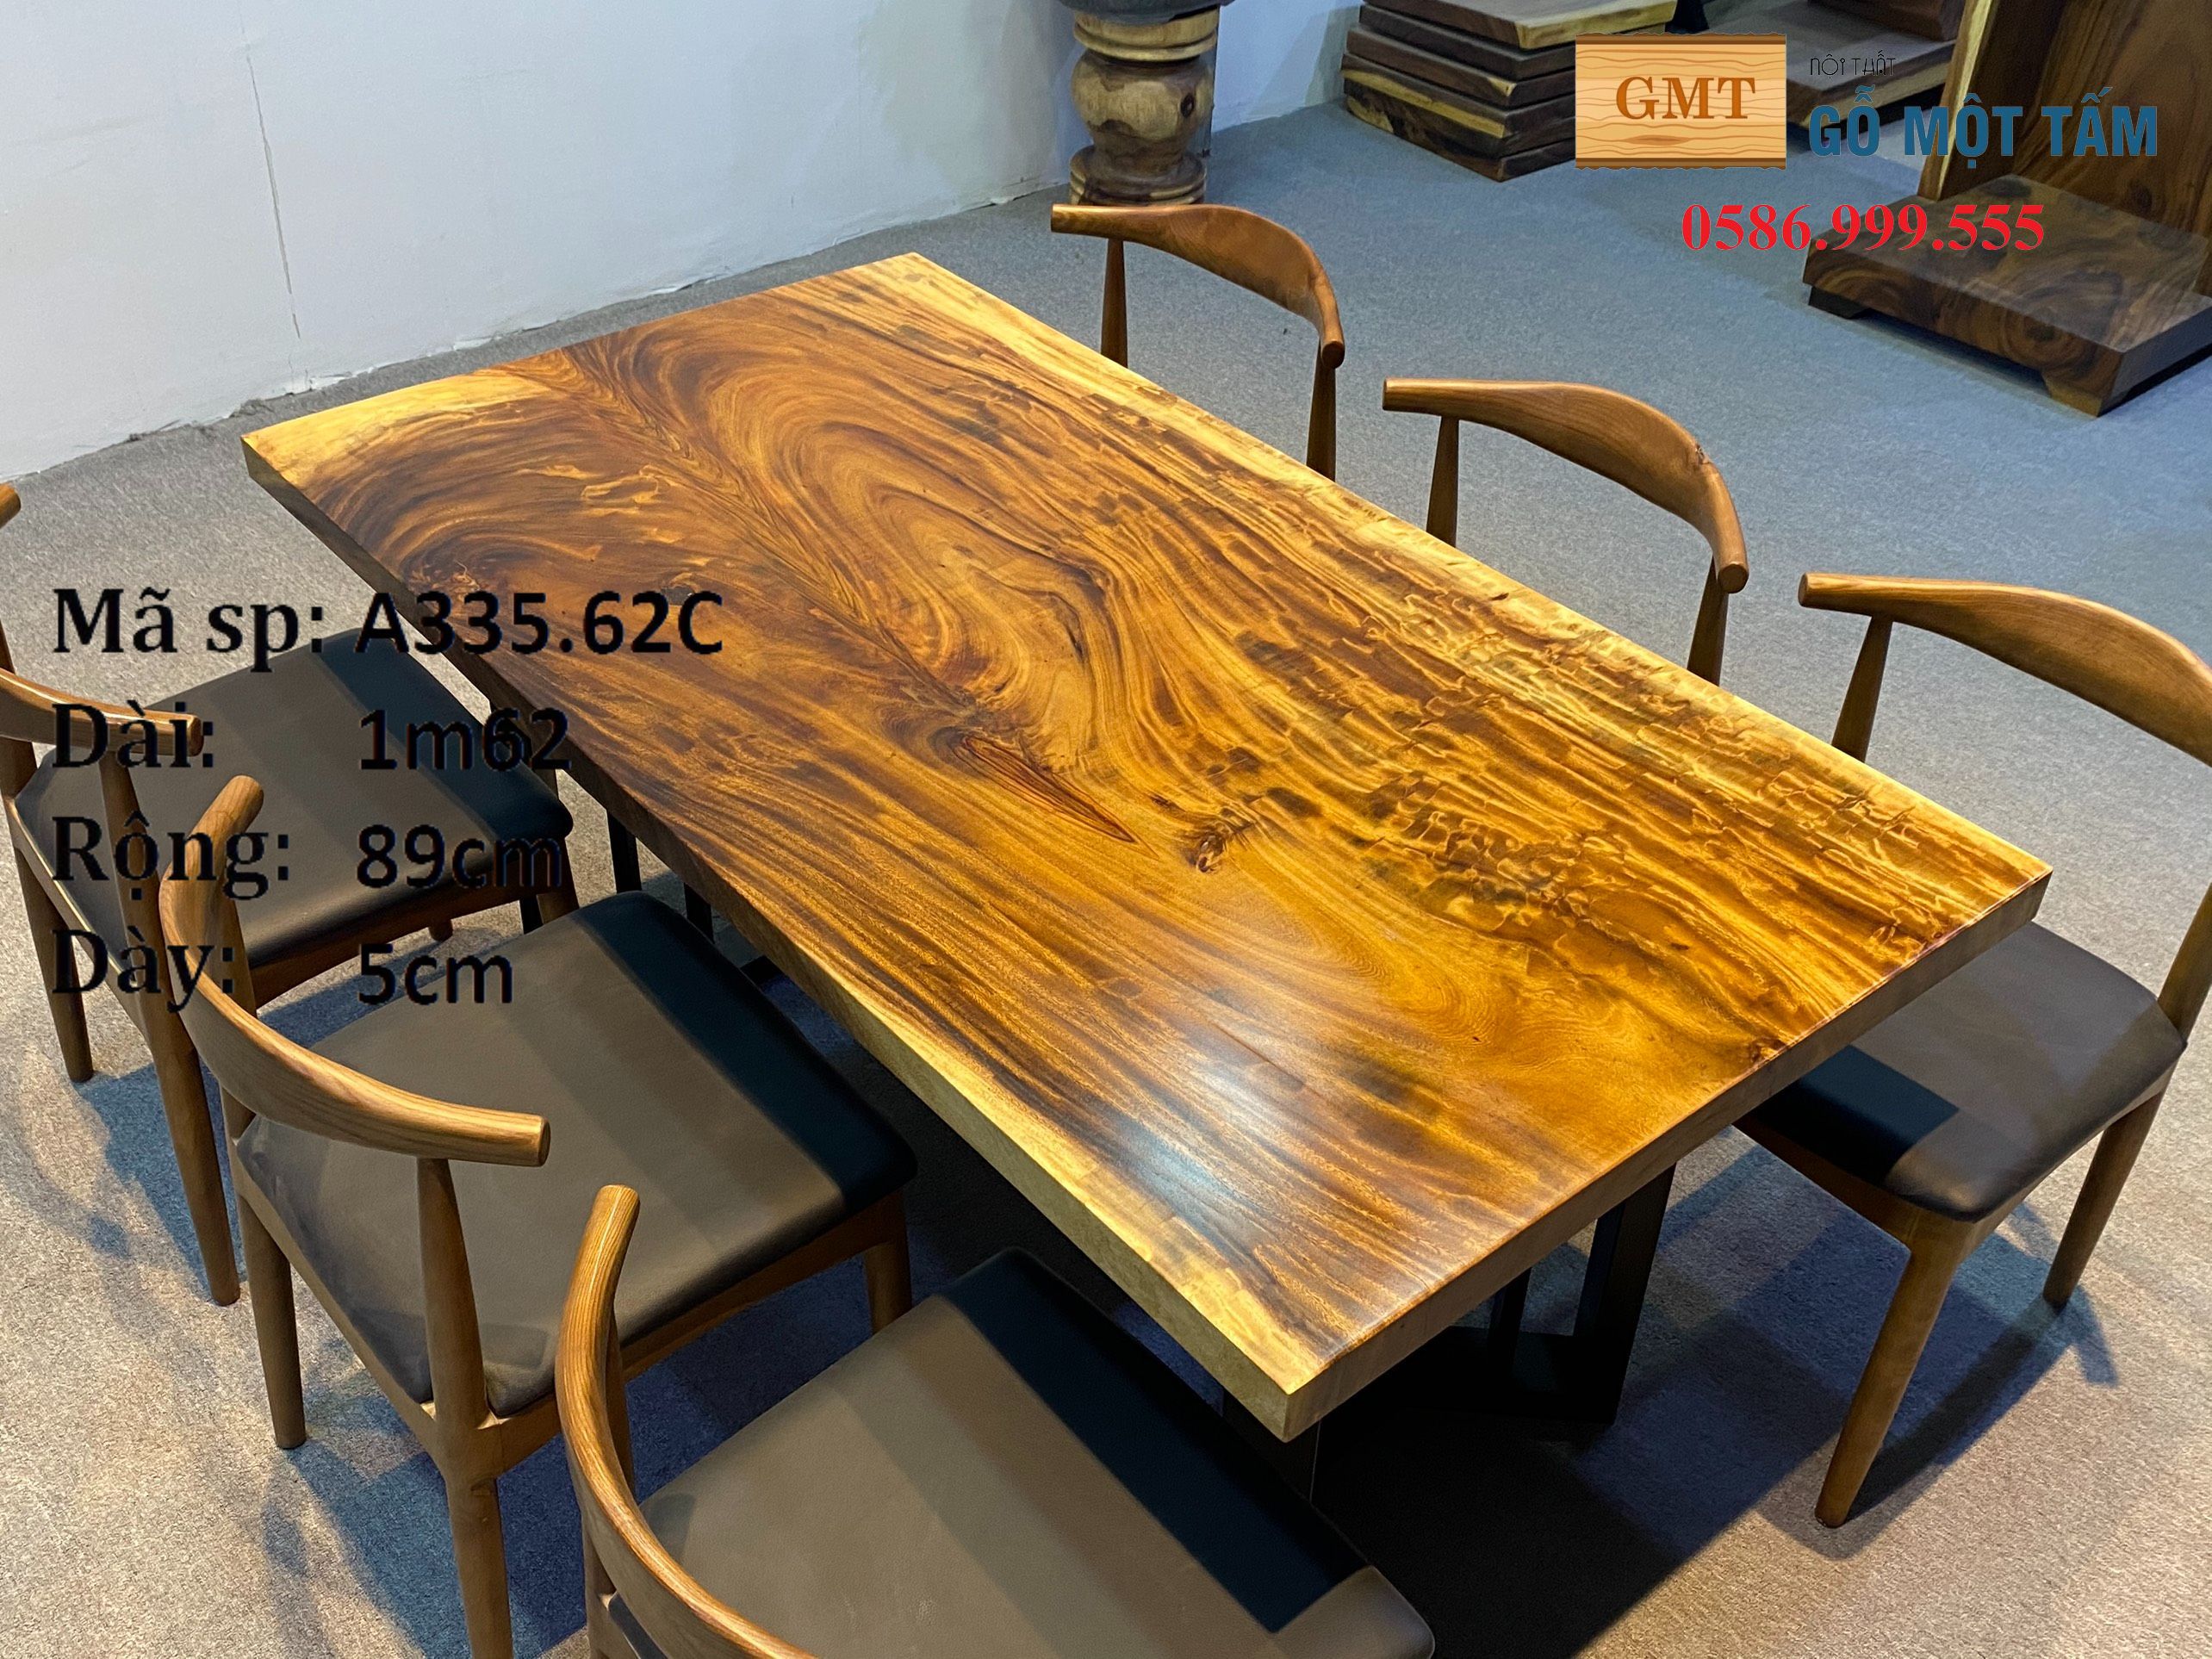 Dining table 6 Wood me western A335 long 1m62 width 89cm thick 5cm factory